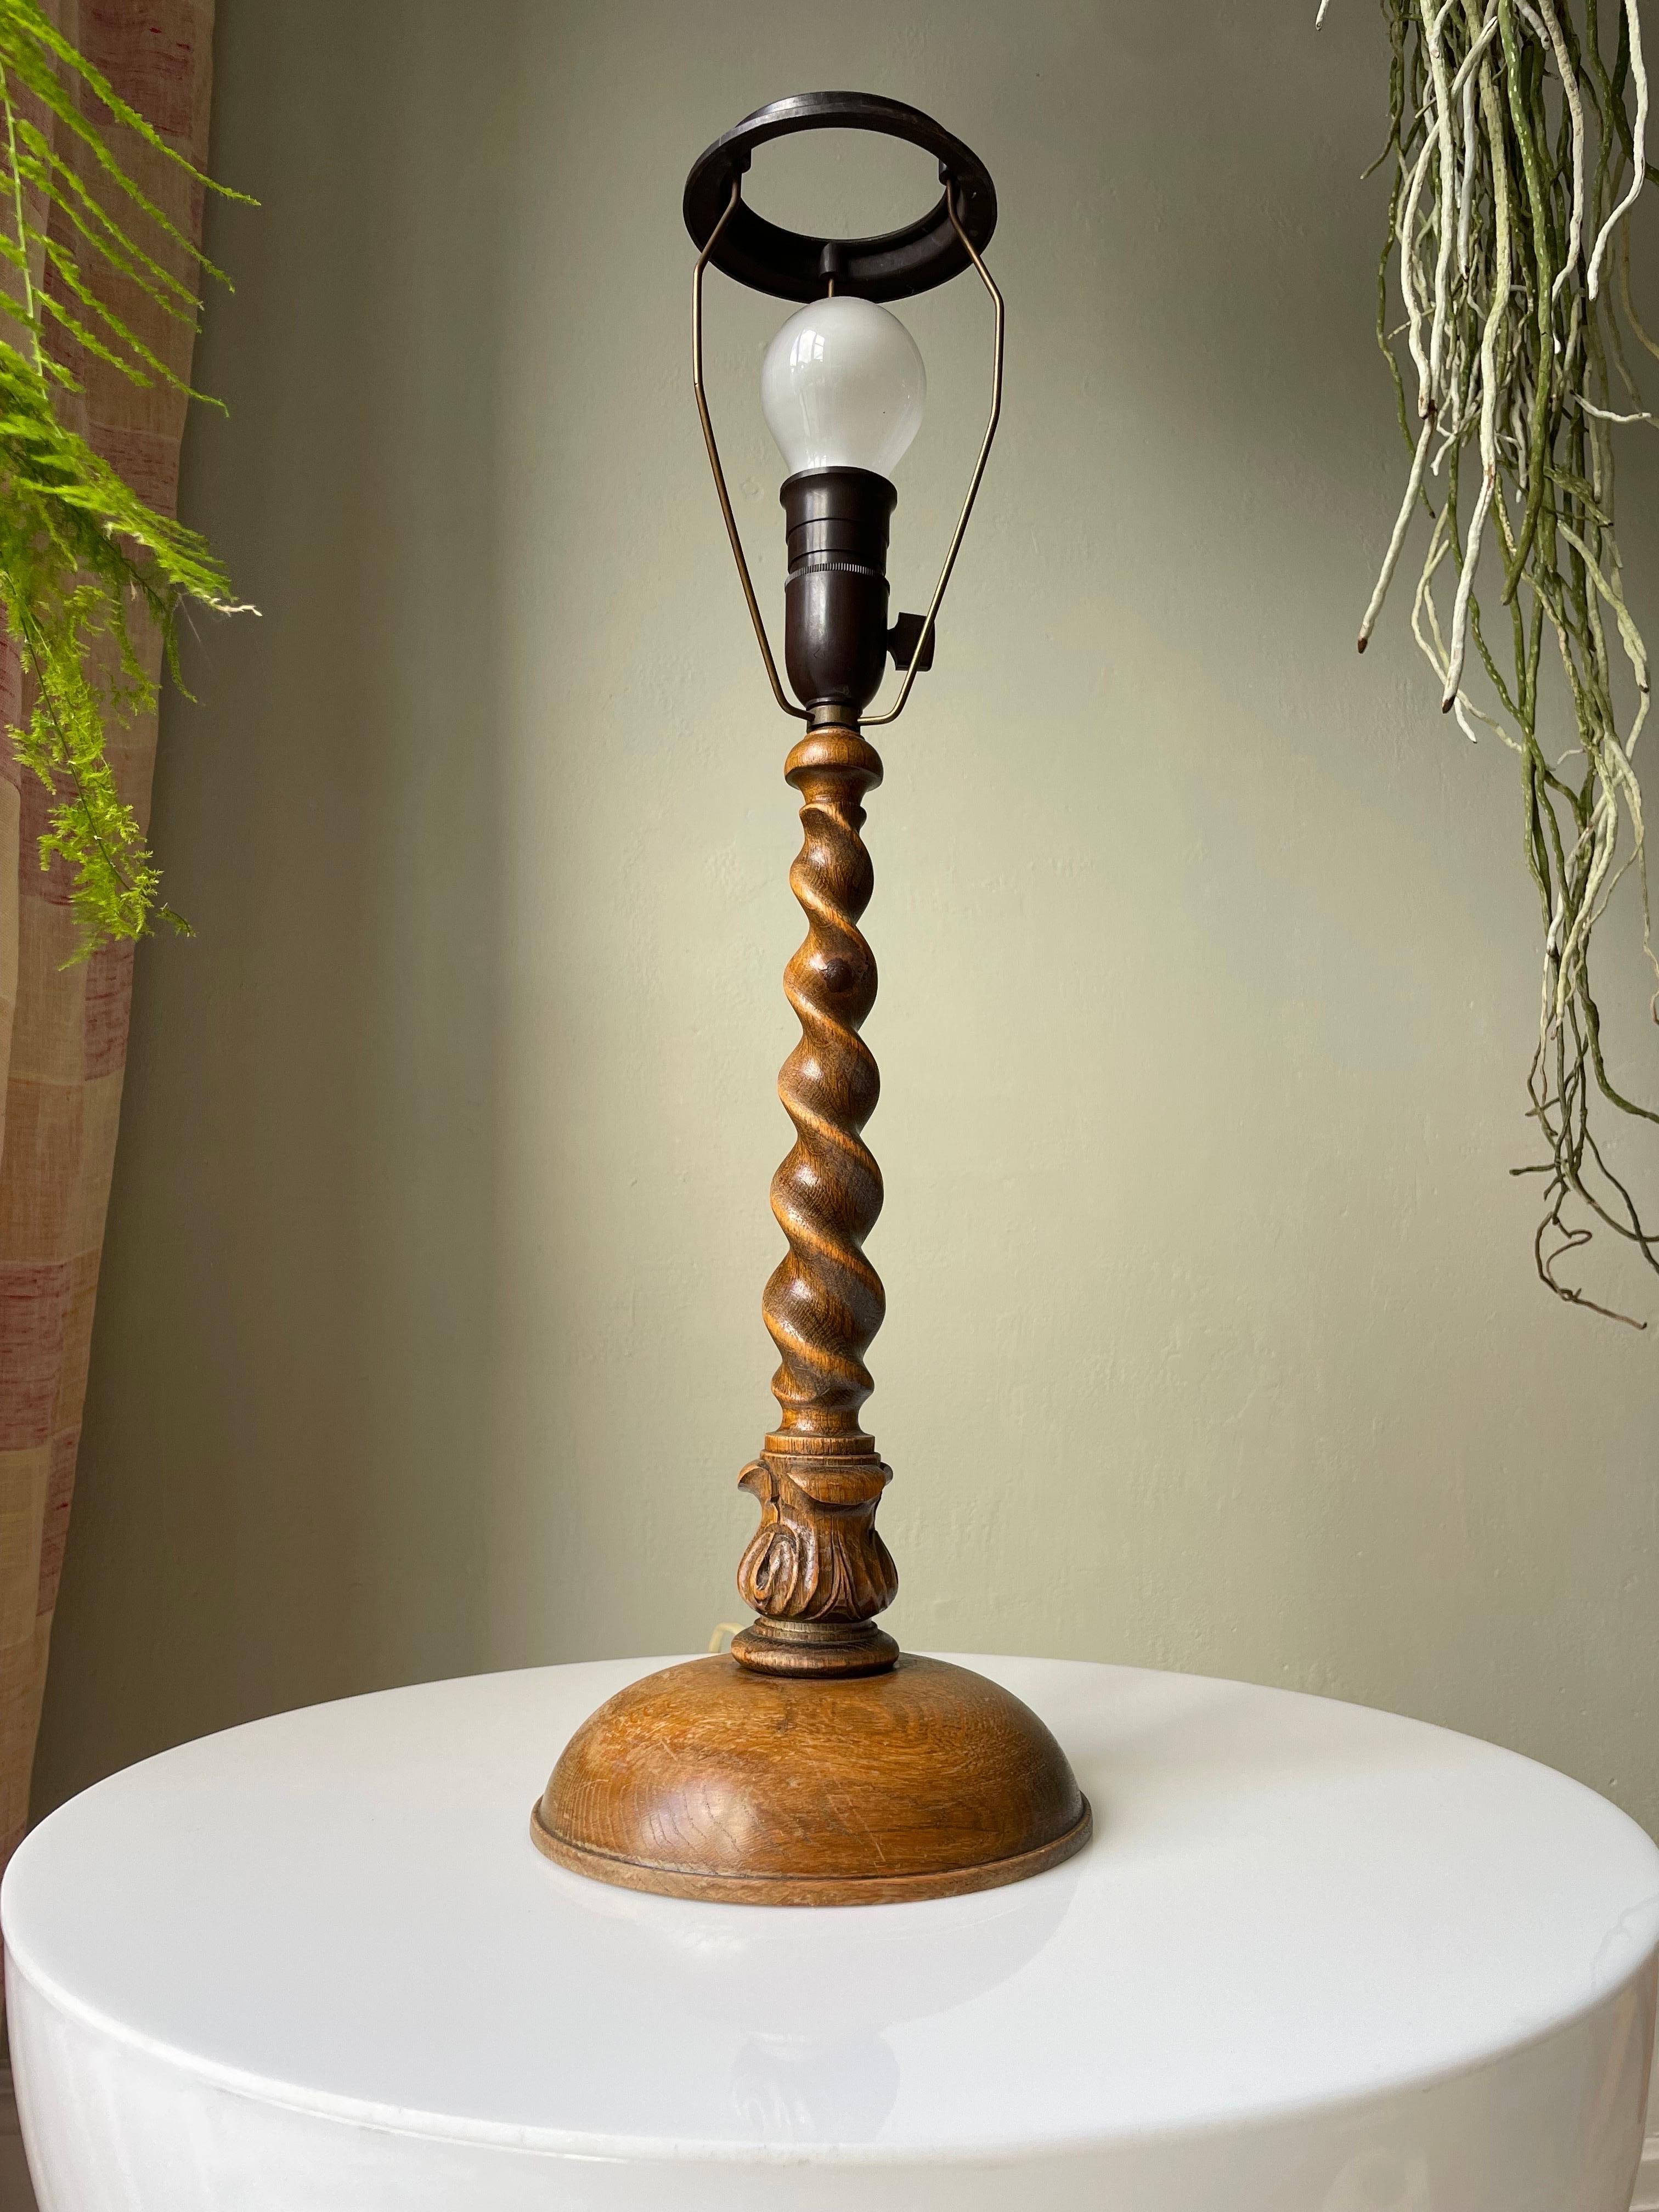 Tall Vintage Swirling Wooden Table Lamp, 1960s For Sale 3